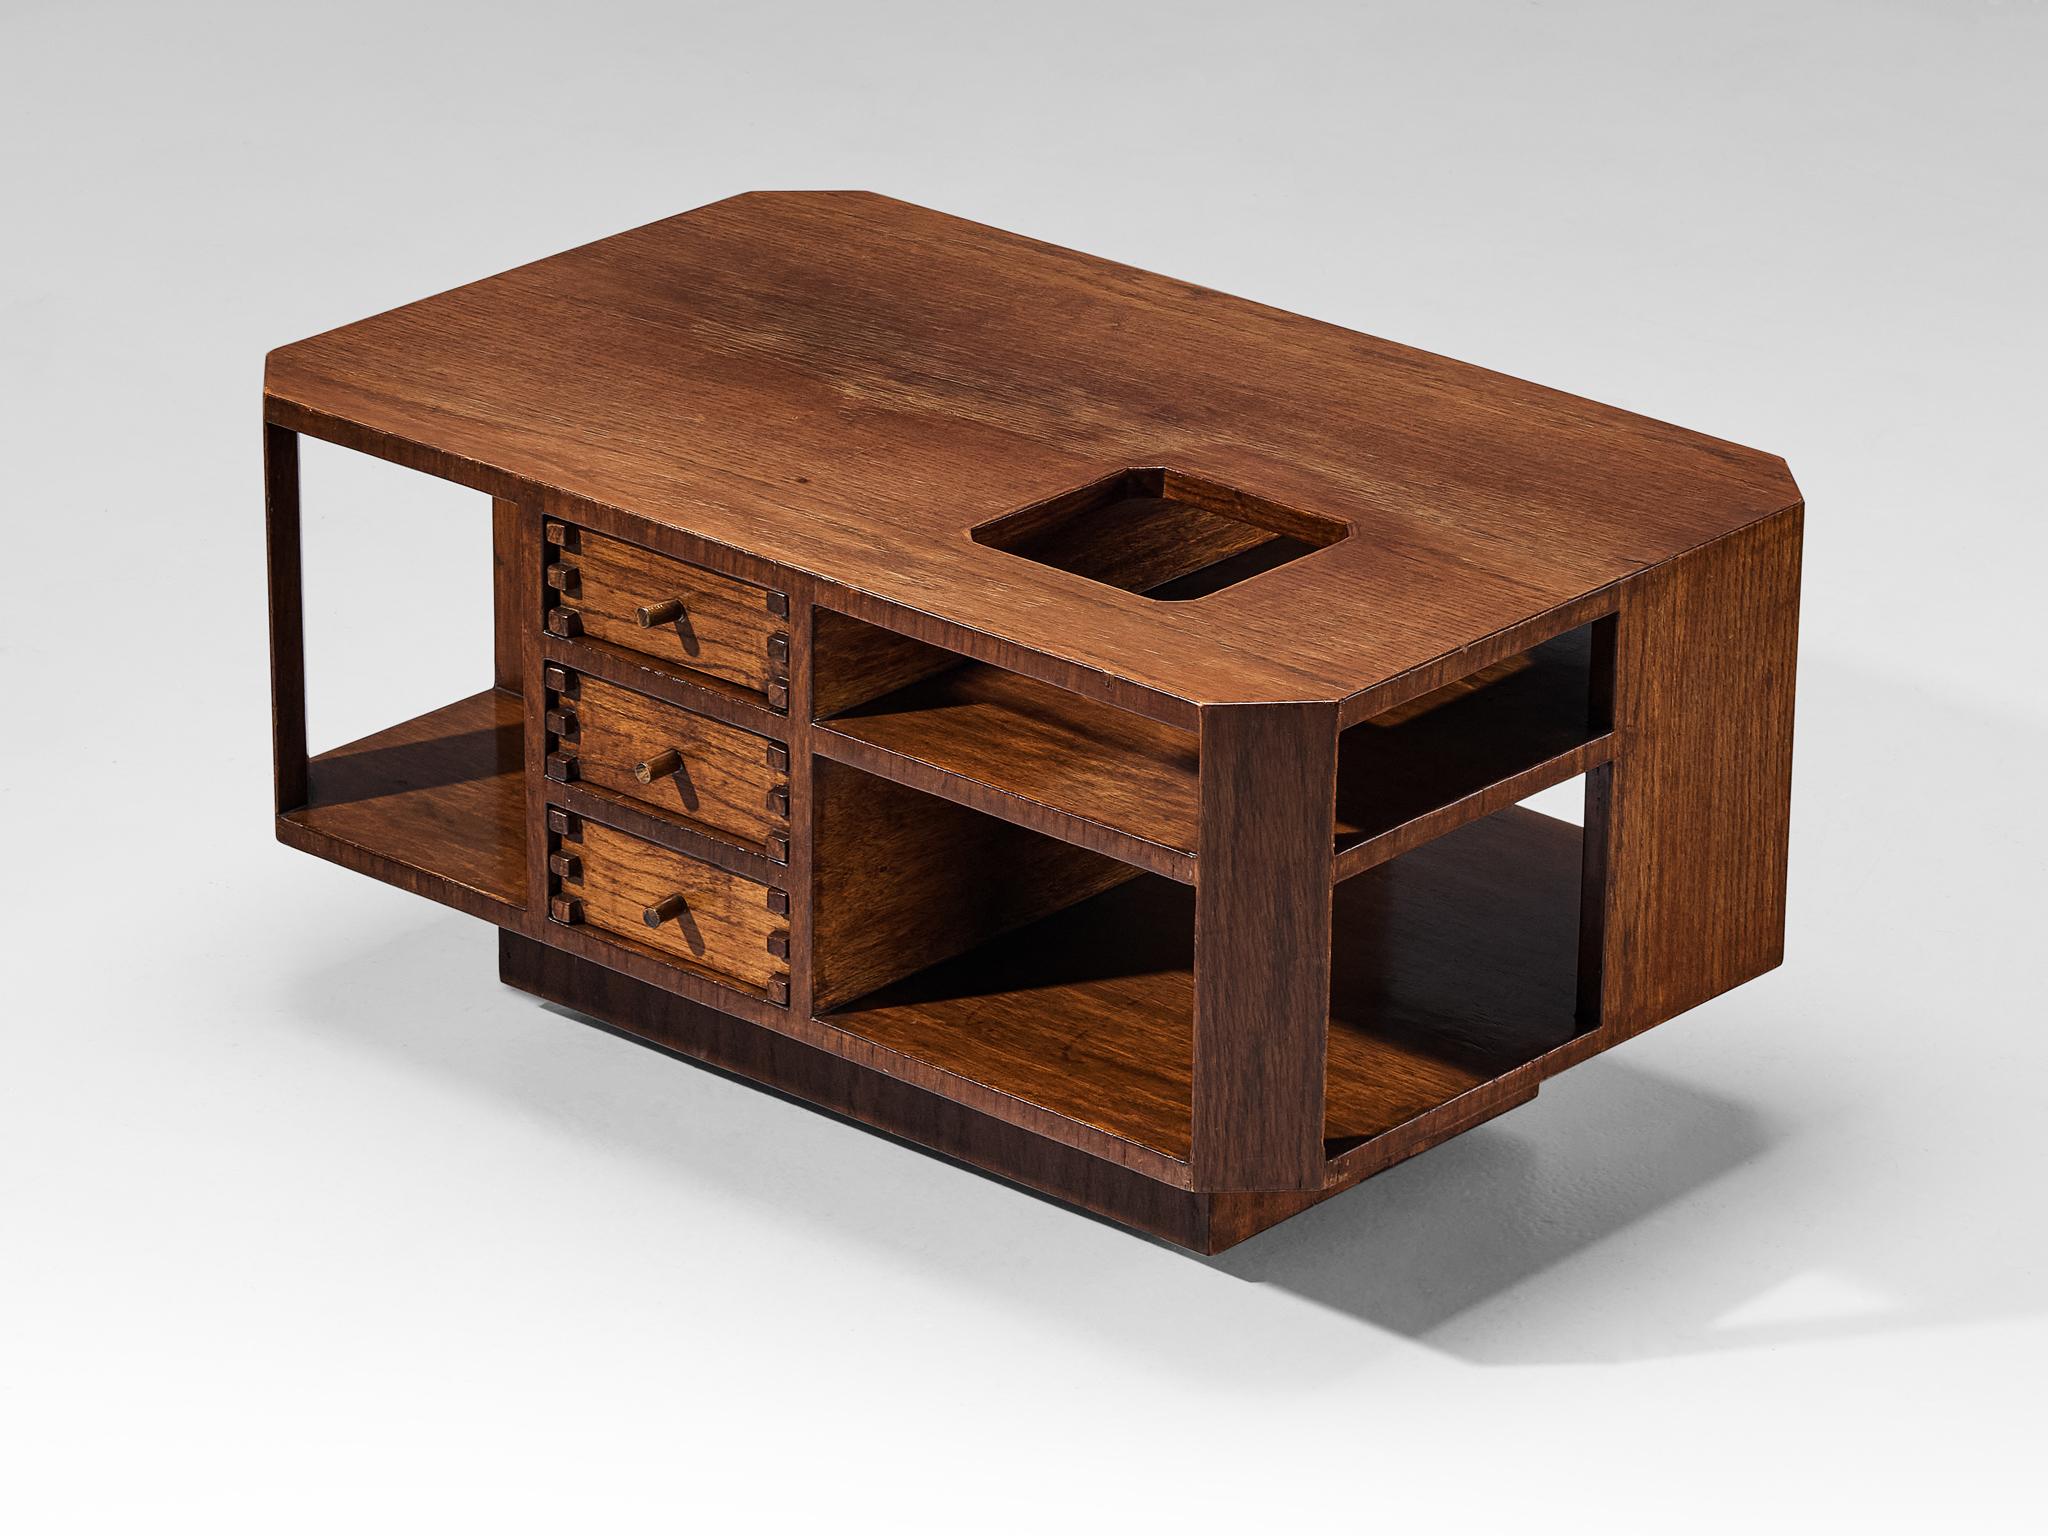 Giuseppe Rivadossi, coffee table, oak, glass, Italy, 1970s.

An exceptional coffee table by the Italian sculptor and designer Giuseppe Rivadossi, featuring a high level of craftsmanship in woodwork. Remarkable about this piece is the diversity of